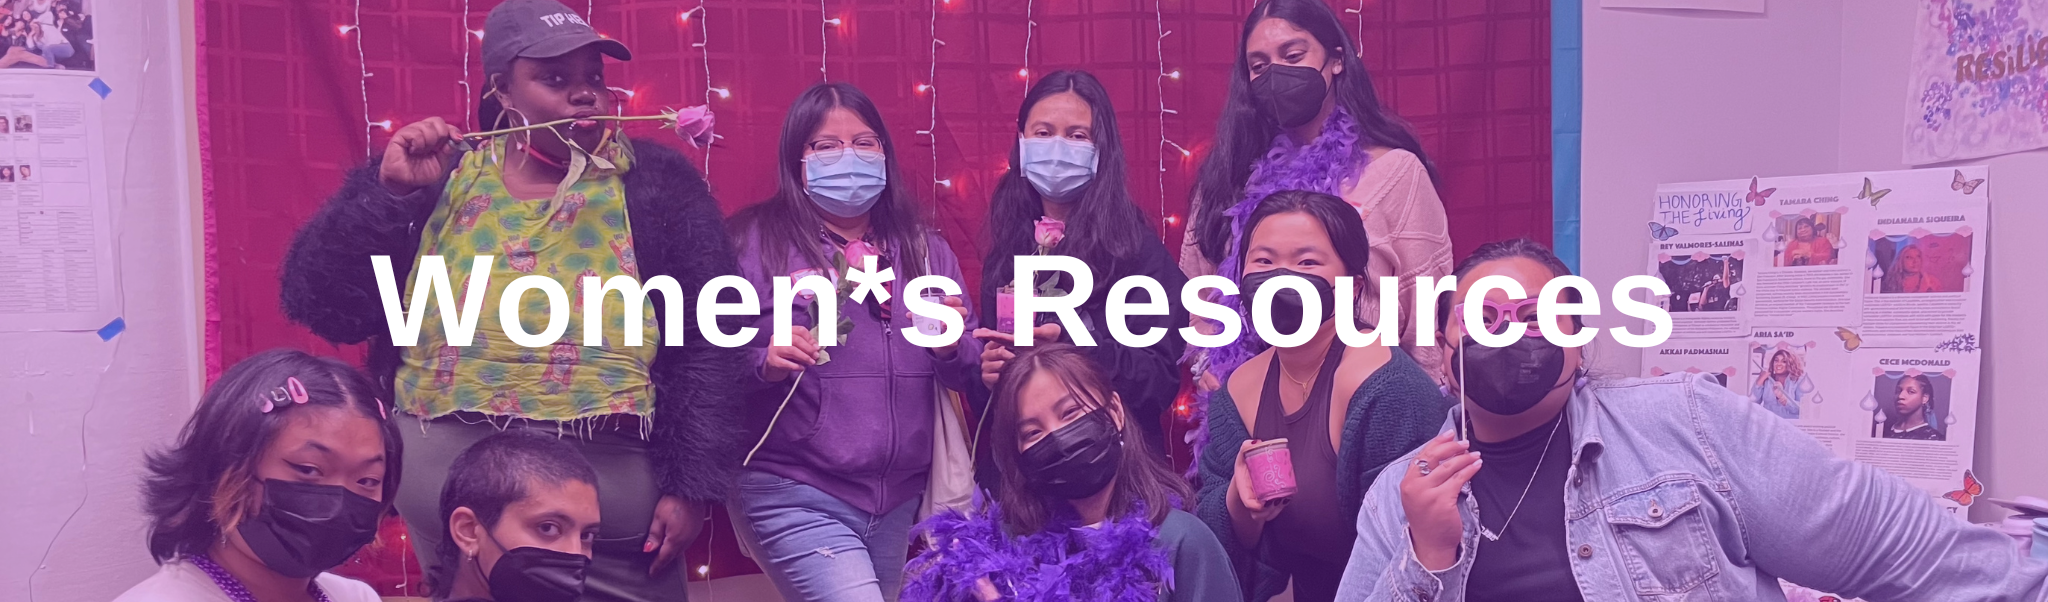 Women*s resources resources bar. Image is from the Women and Femmes Community welcome in Spring 2022. The White Text over the image reads "Women's Resources" with an asterisk instead of the apostrophe to signify a more inclusive definition of woman